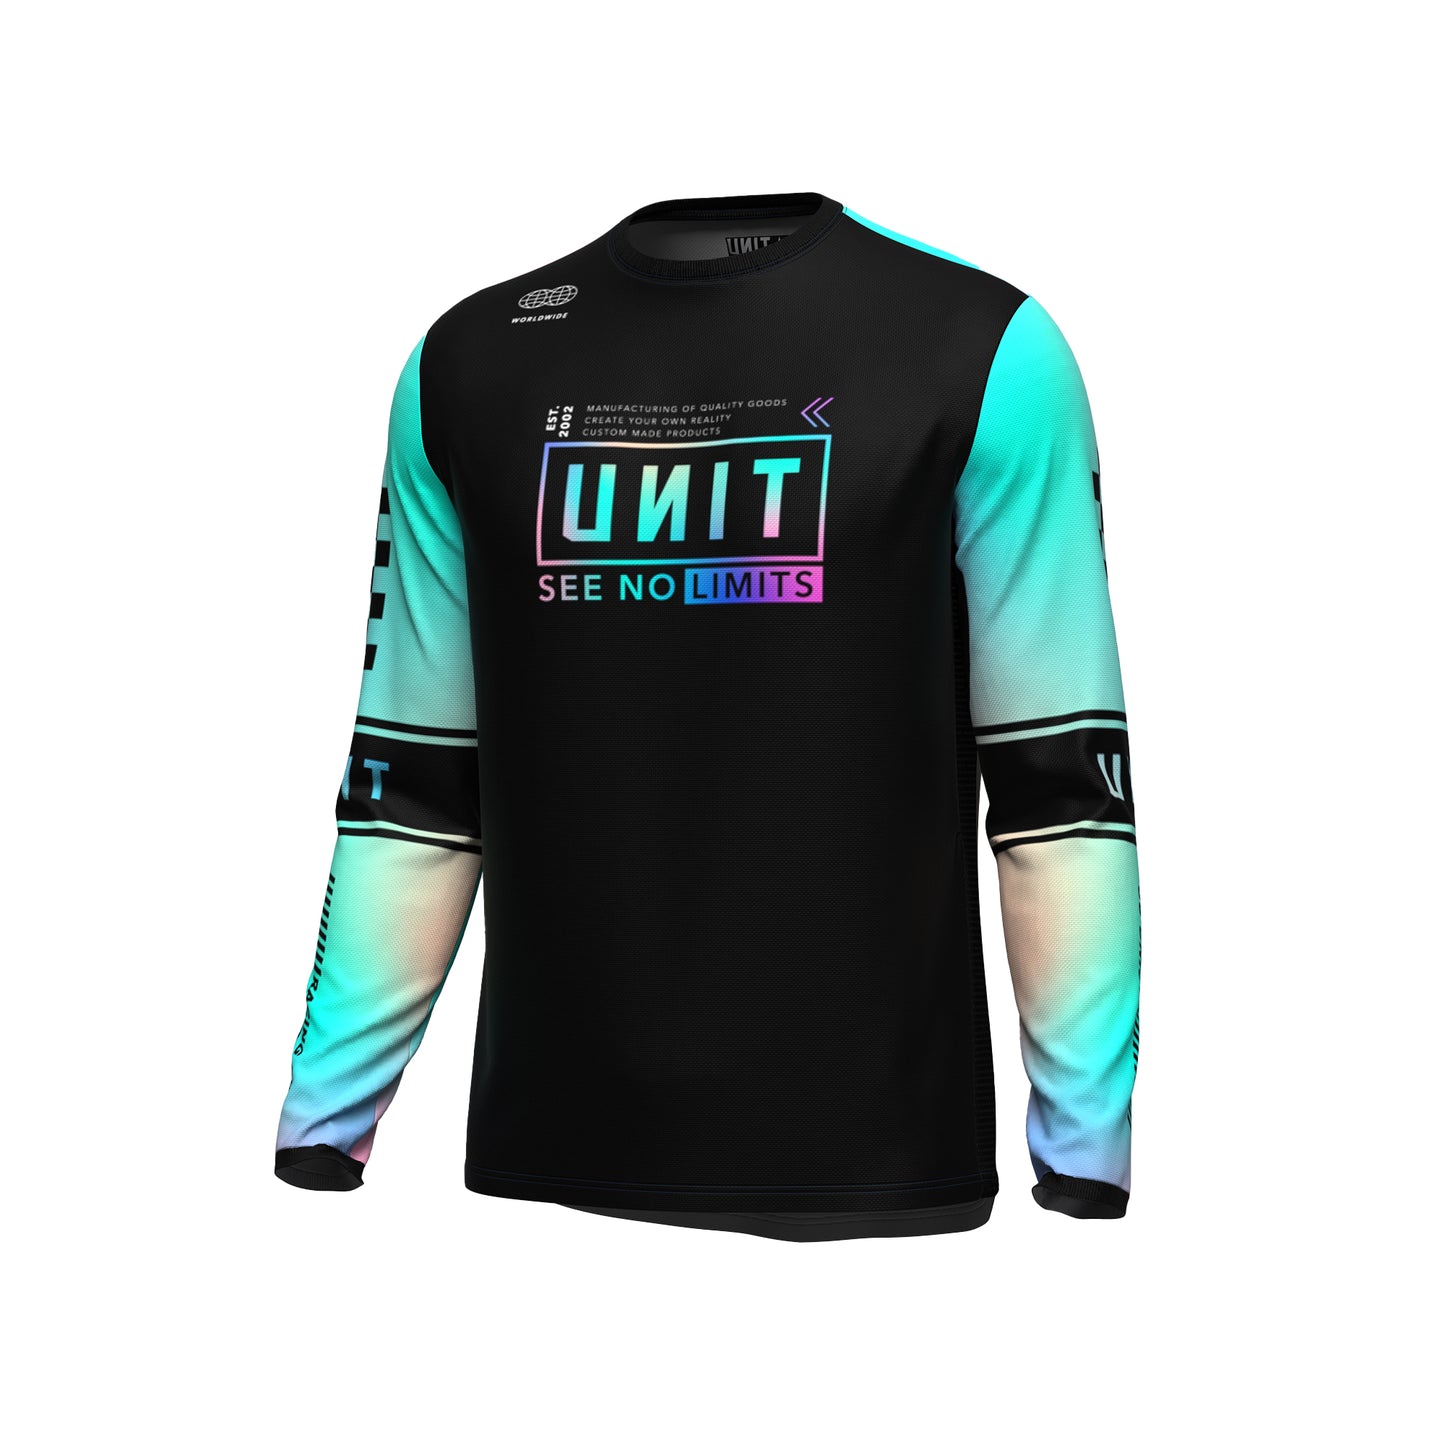 Unit Youth Long Sleeve Jersey - Youth S - Vista - Image 1